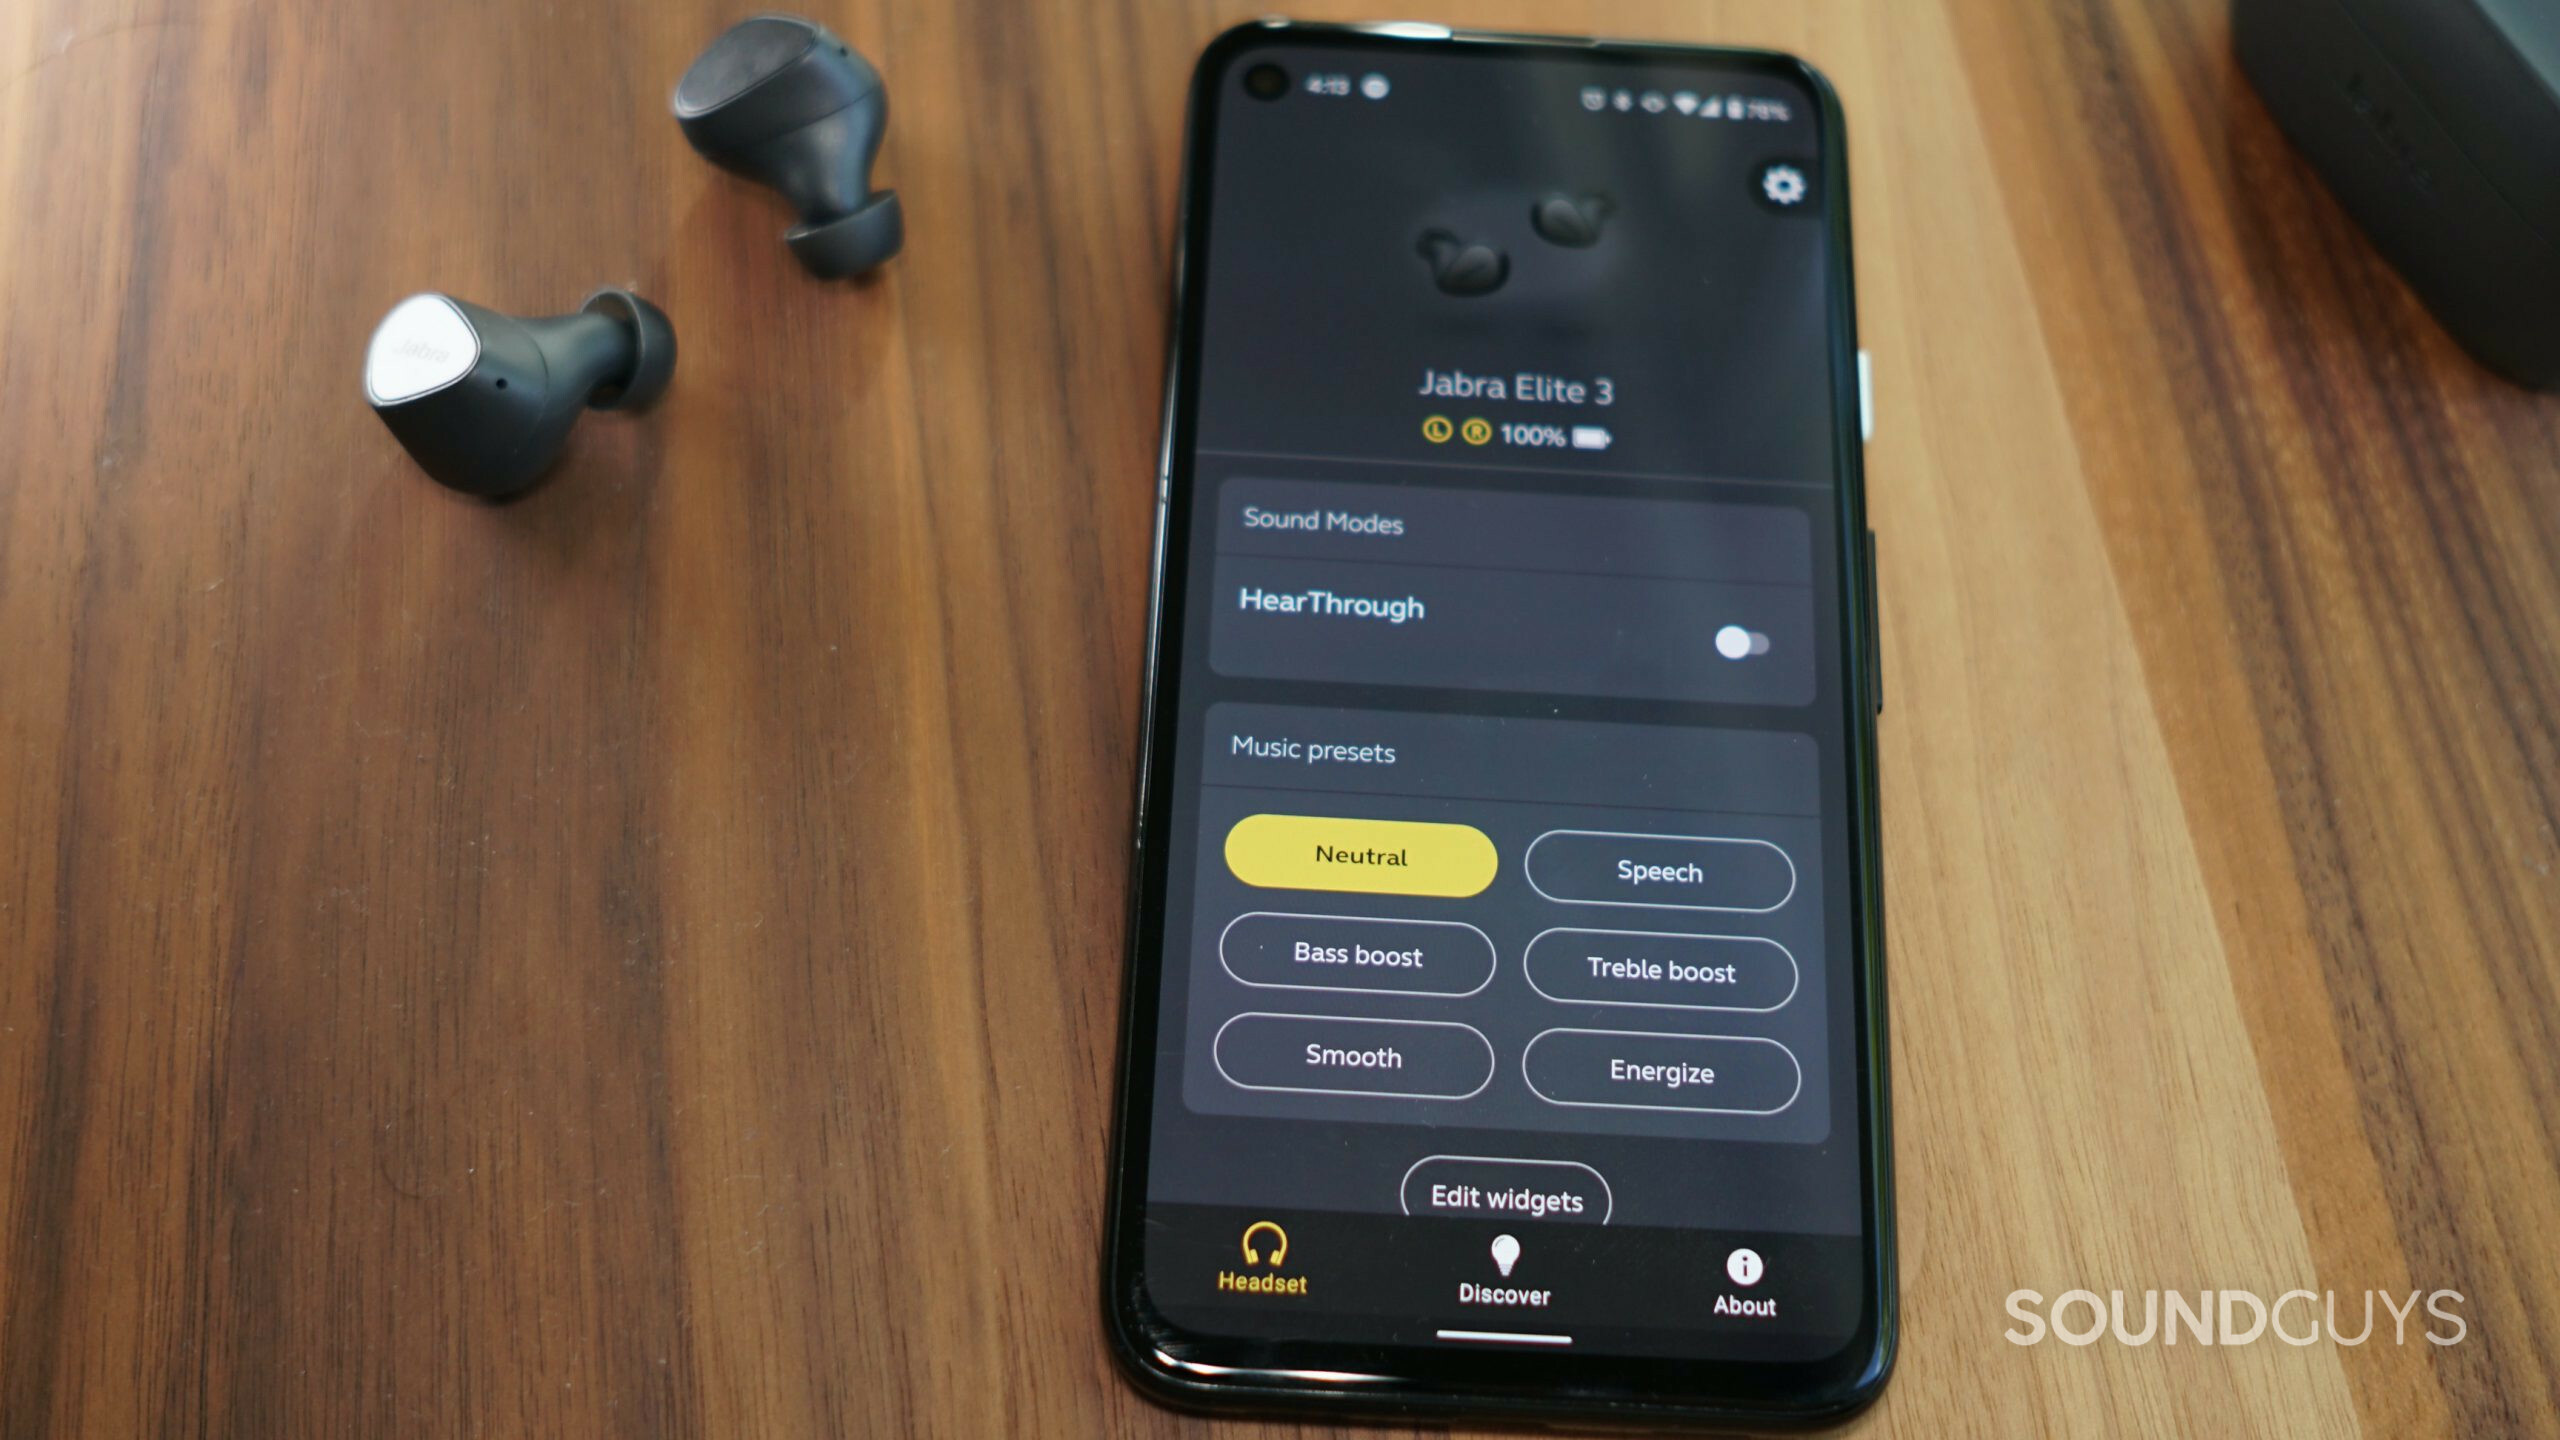 The Jabra Elite 3 true wireless earbuds lay on a wooden table next to a Google Pixel 4a with the Jabra Sound + app open.